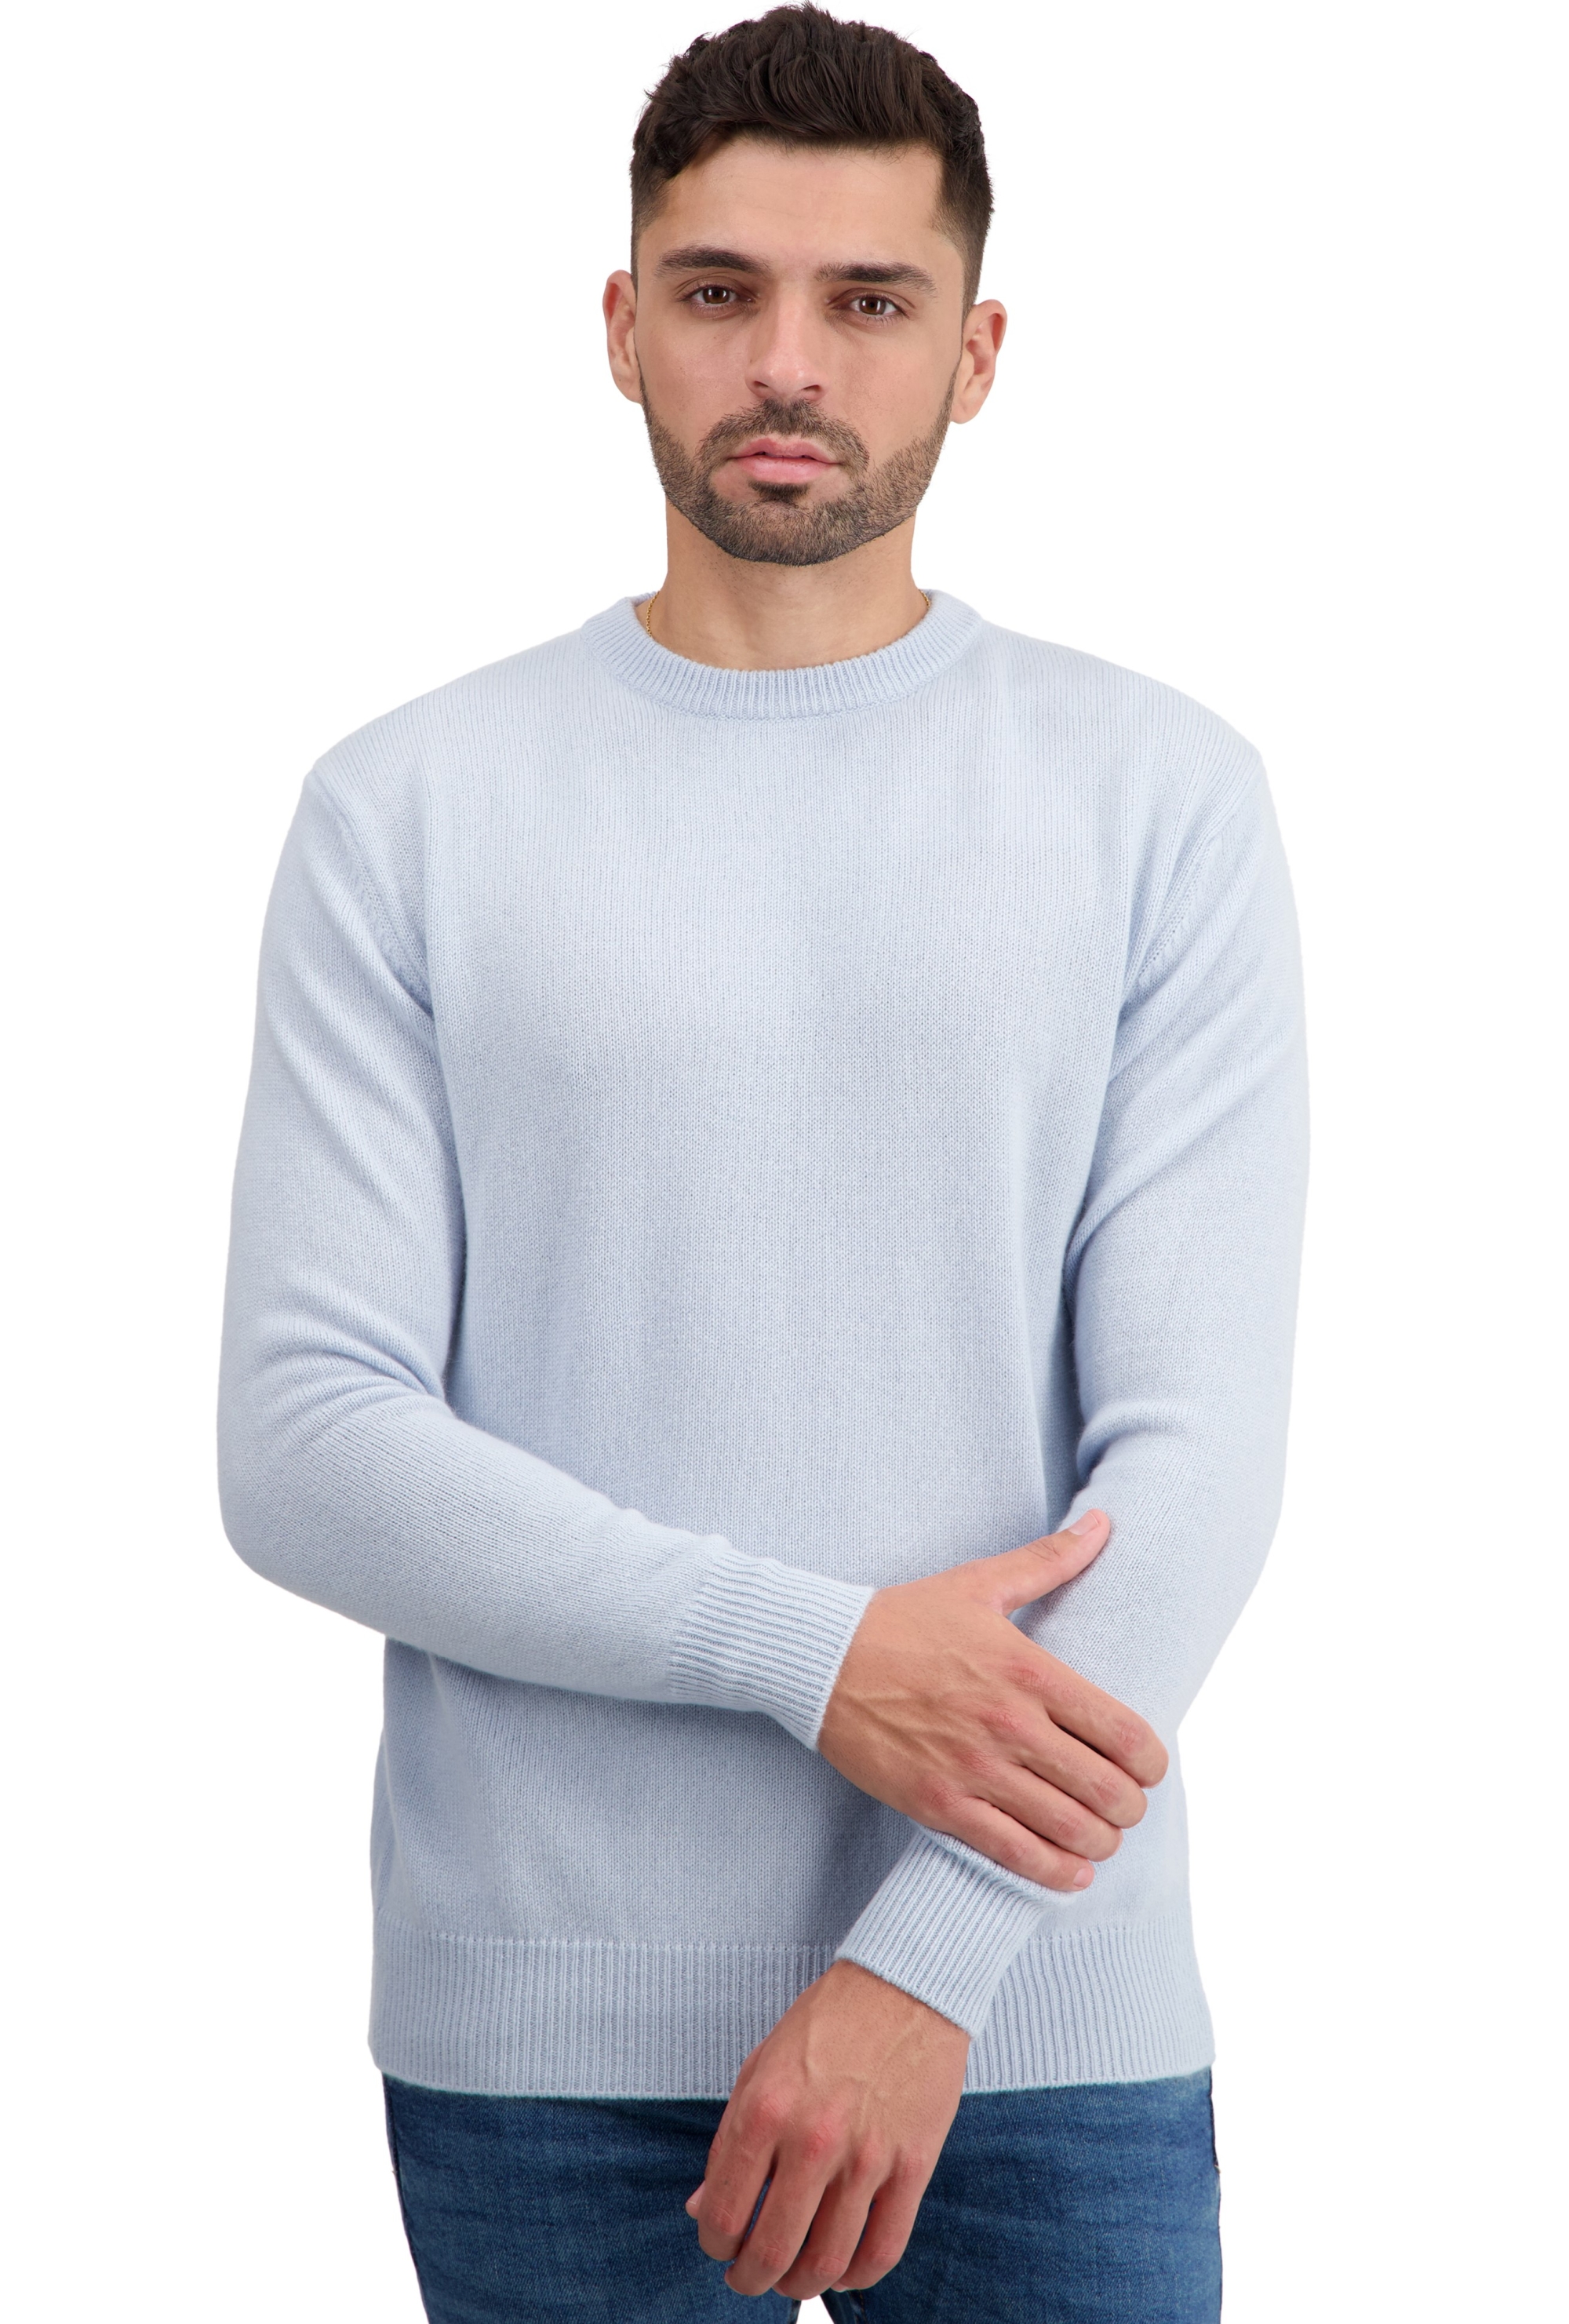 Cashmere men basic sweaters at low prices touraine first whisper l